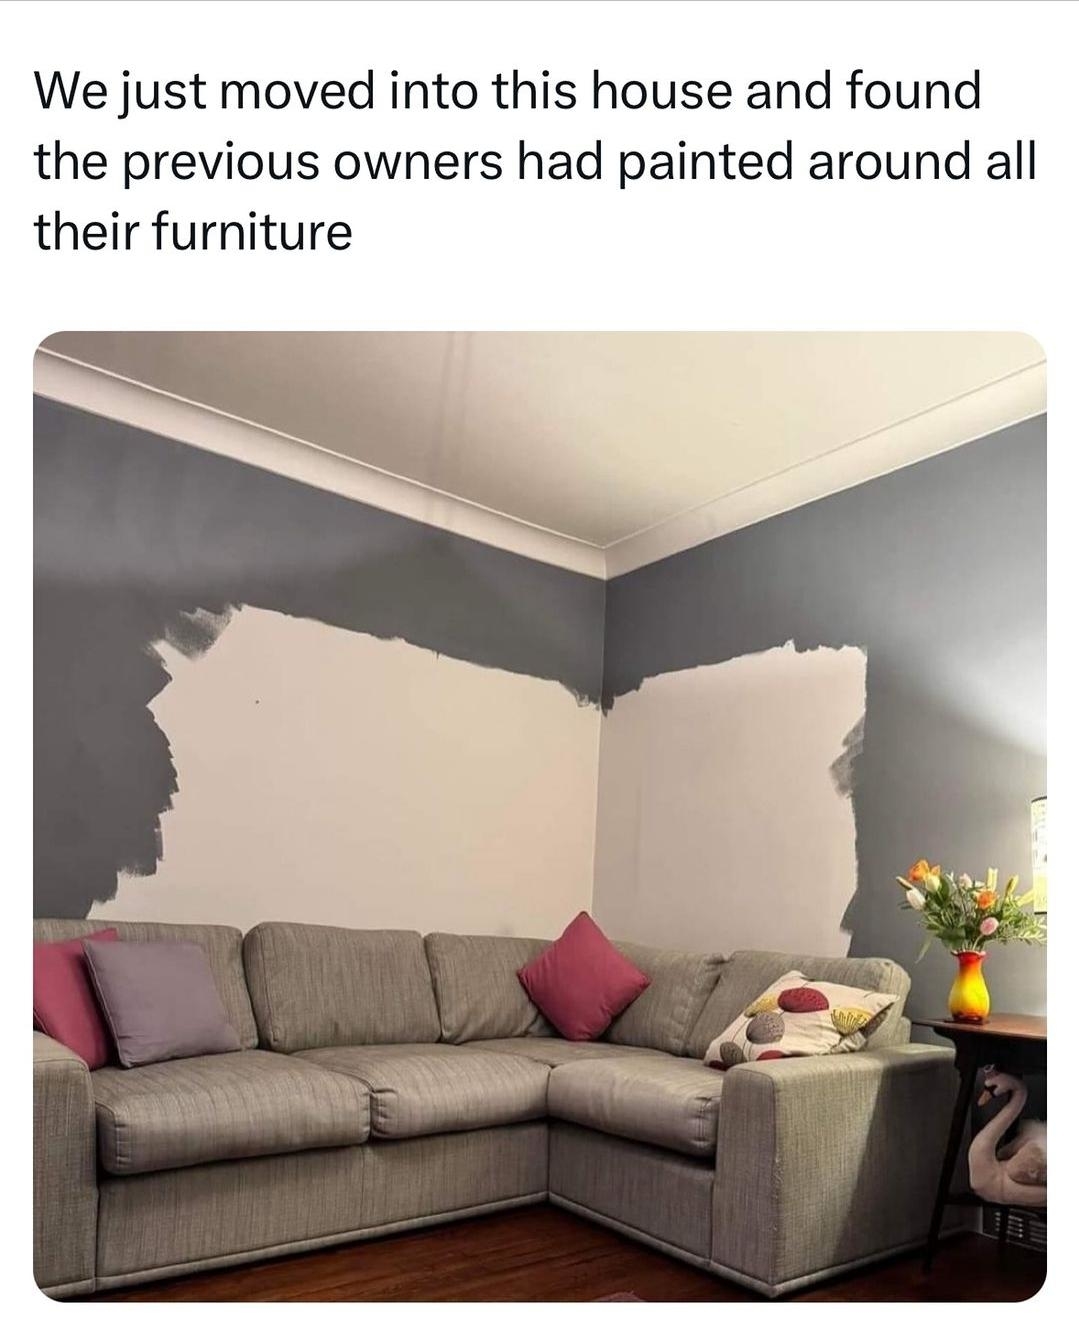 A sofa with uneven paint on walls behind it, where previous owners painted around decor, leaving patches